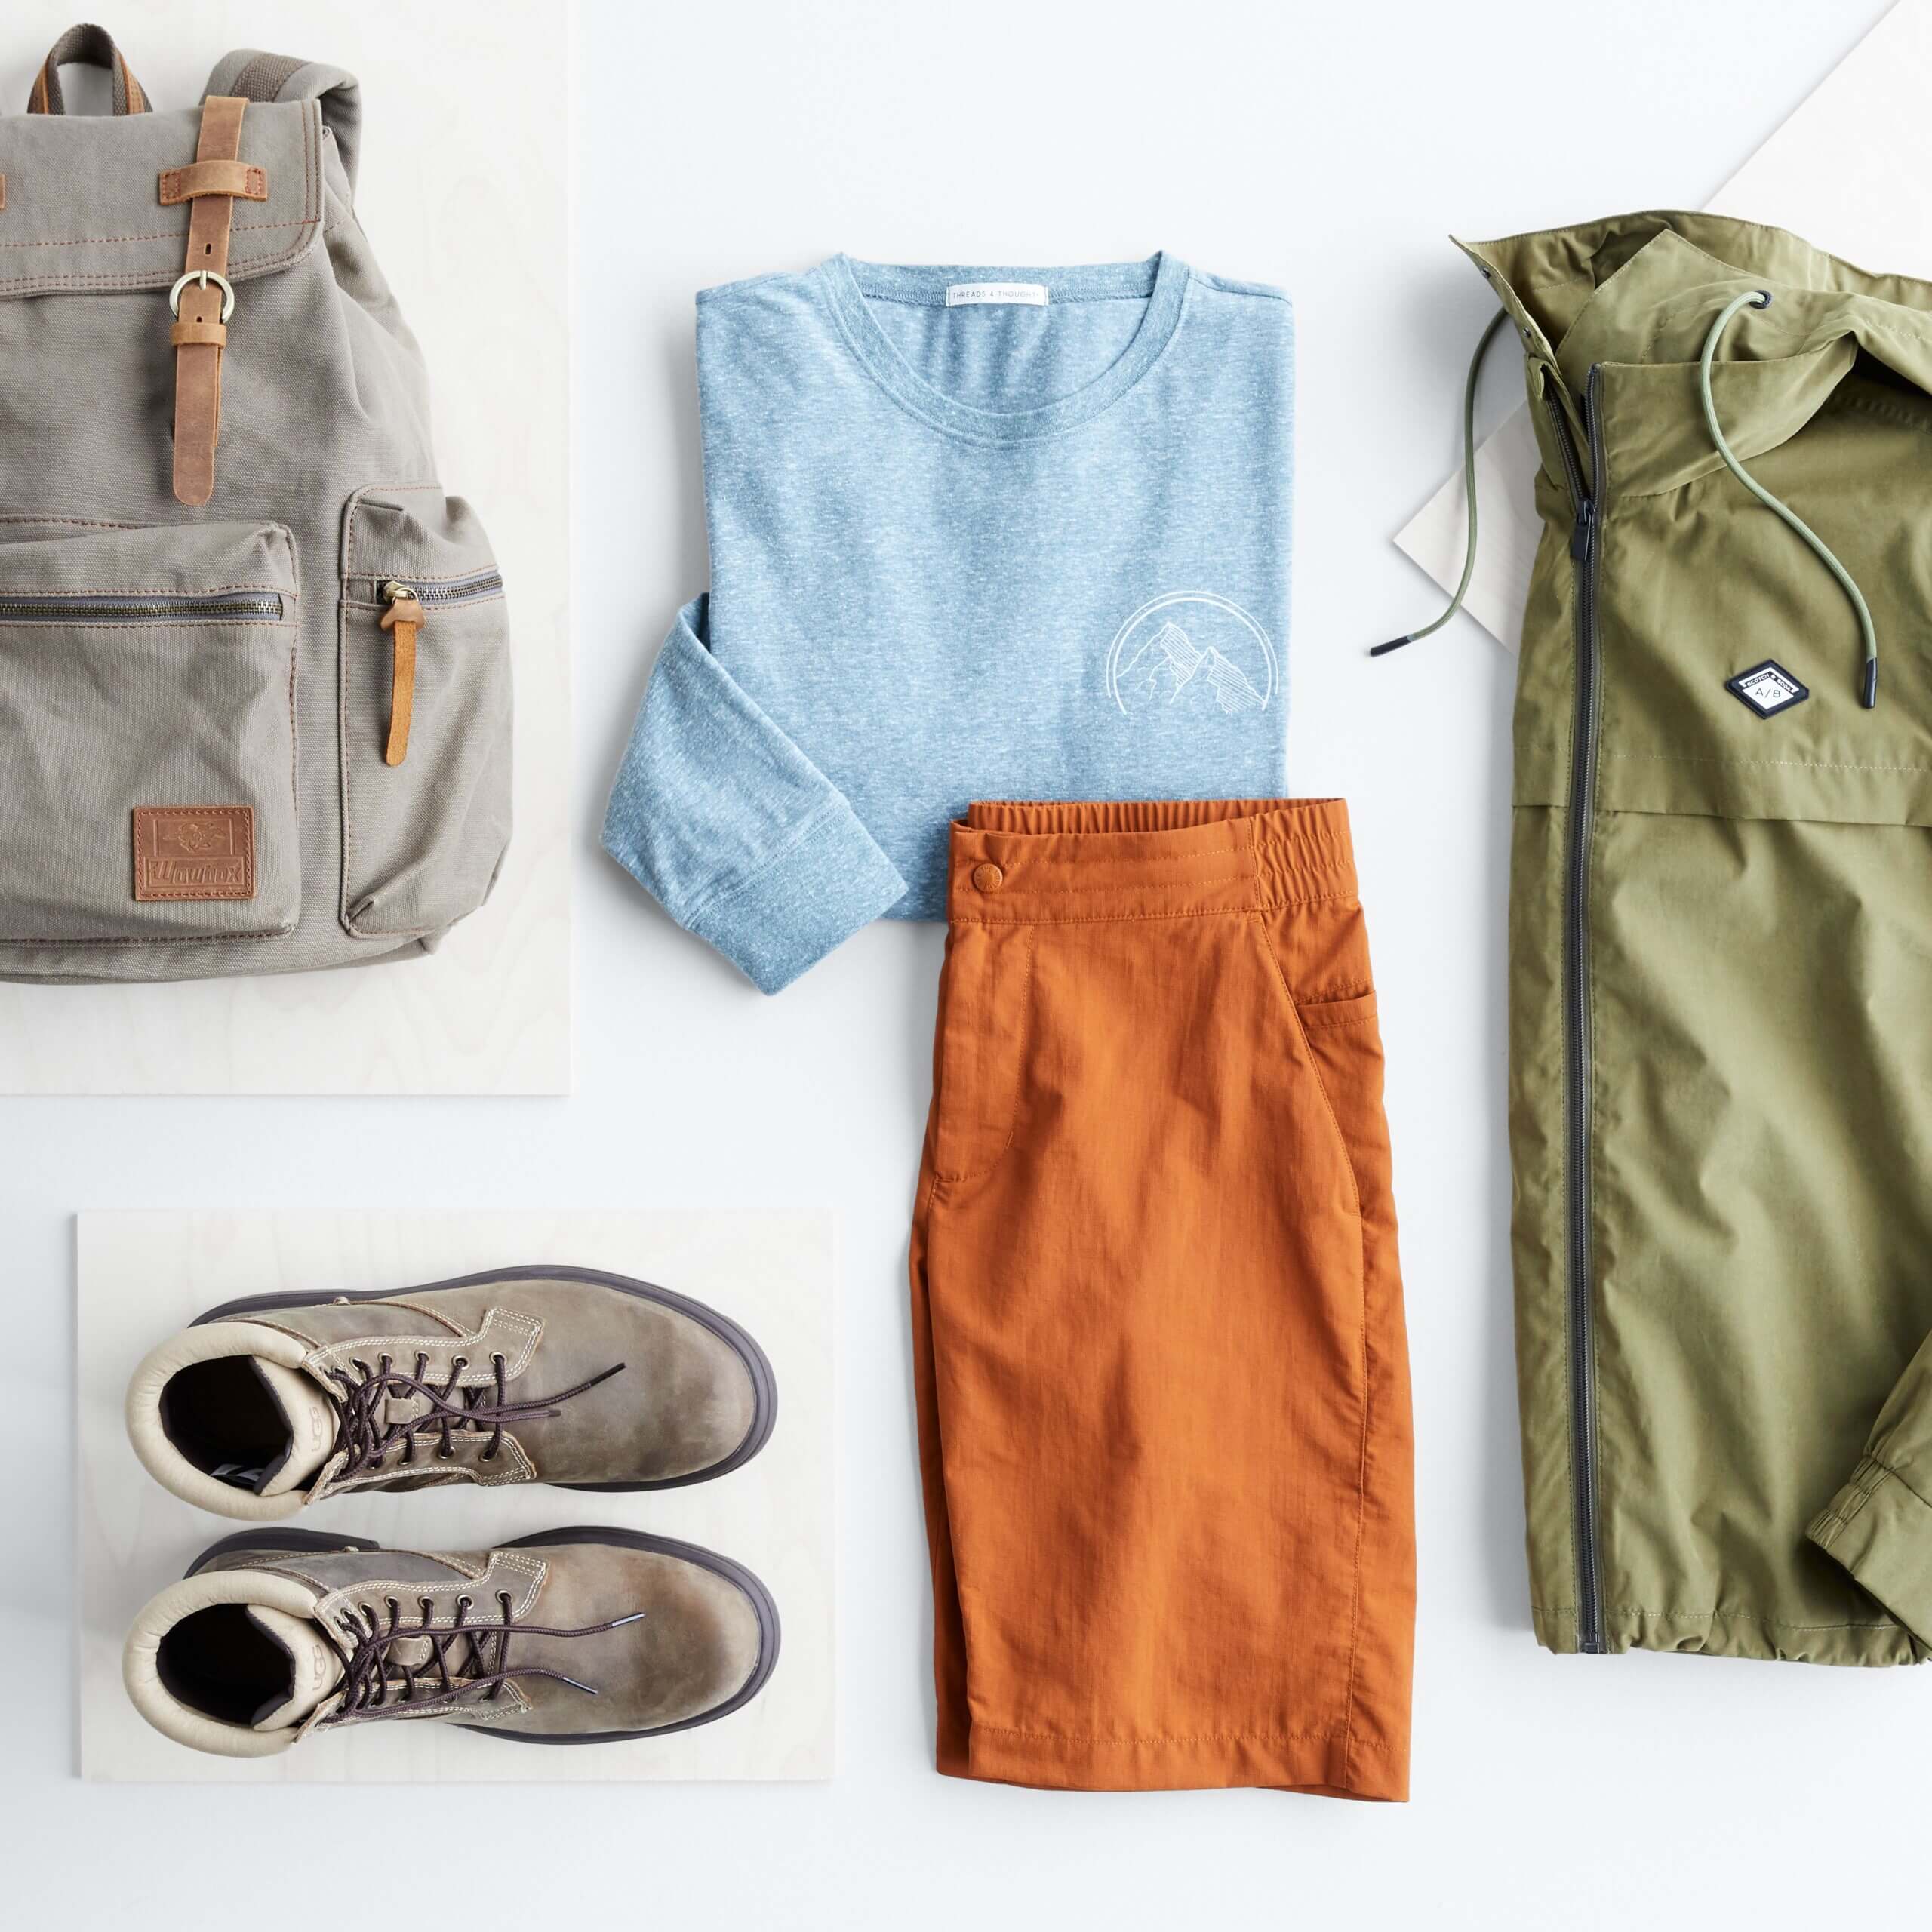 Channel The Great Outdoors Into Your Wardrobe With The Gorpcore Trend